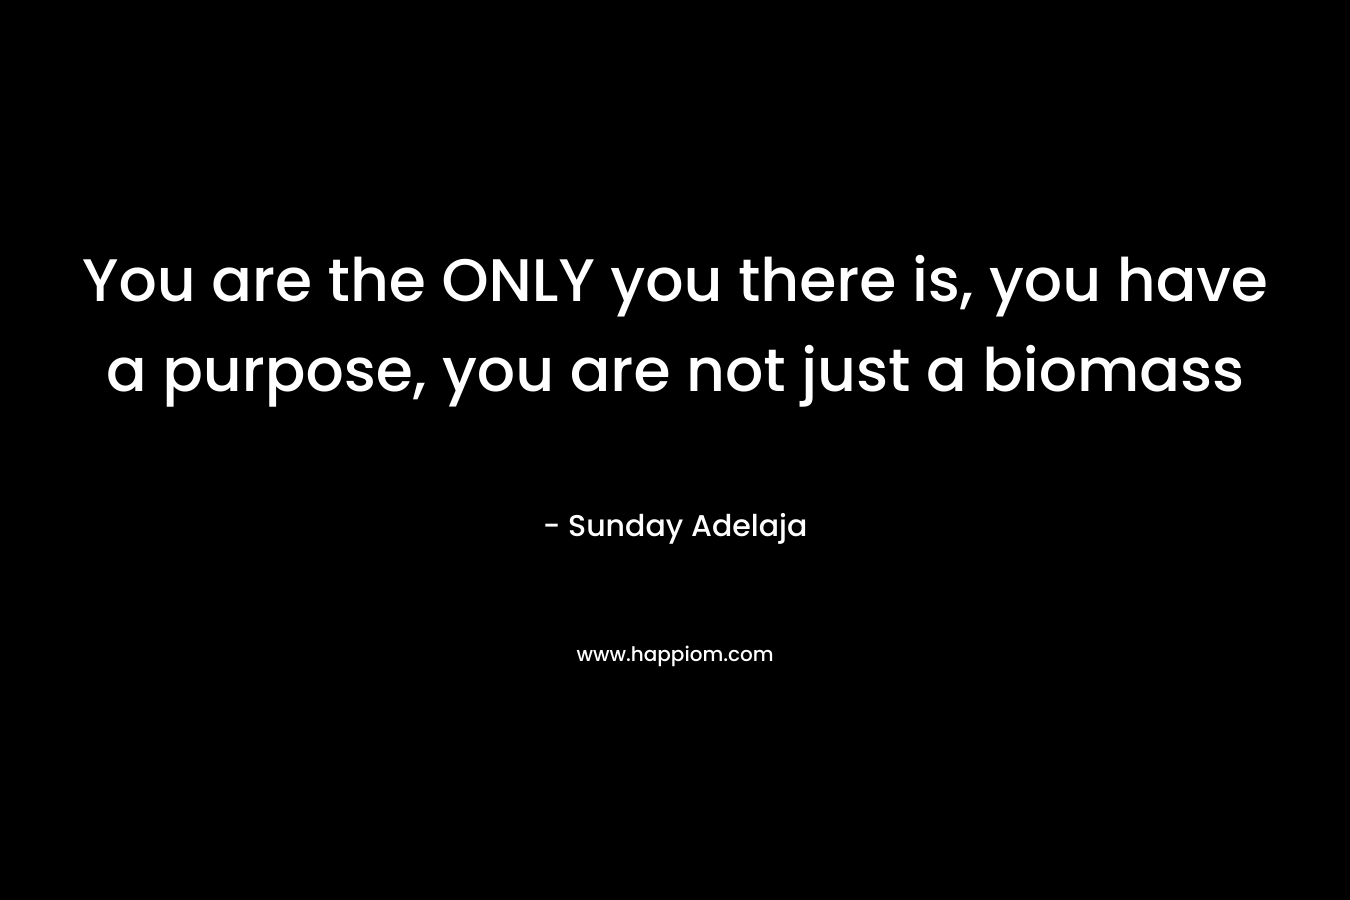 You are the ONLY you there is, you have a purpose, you are not just a biomass